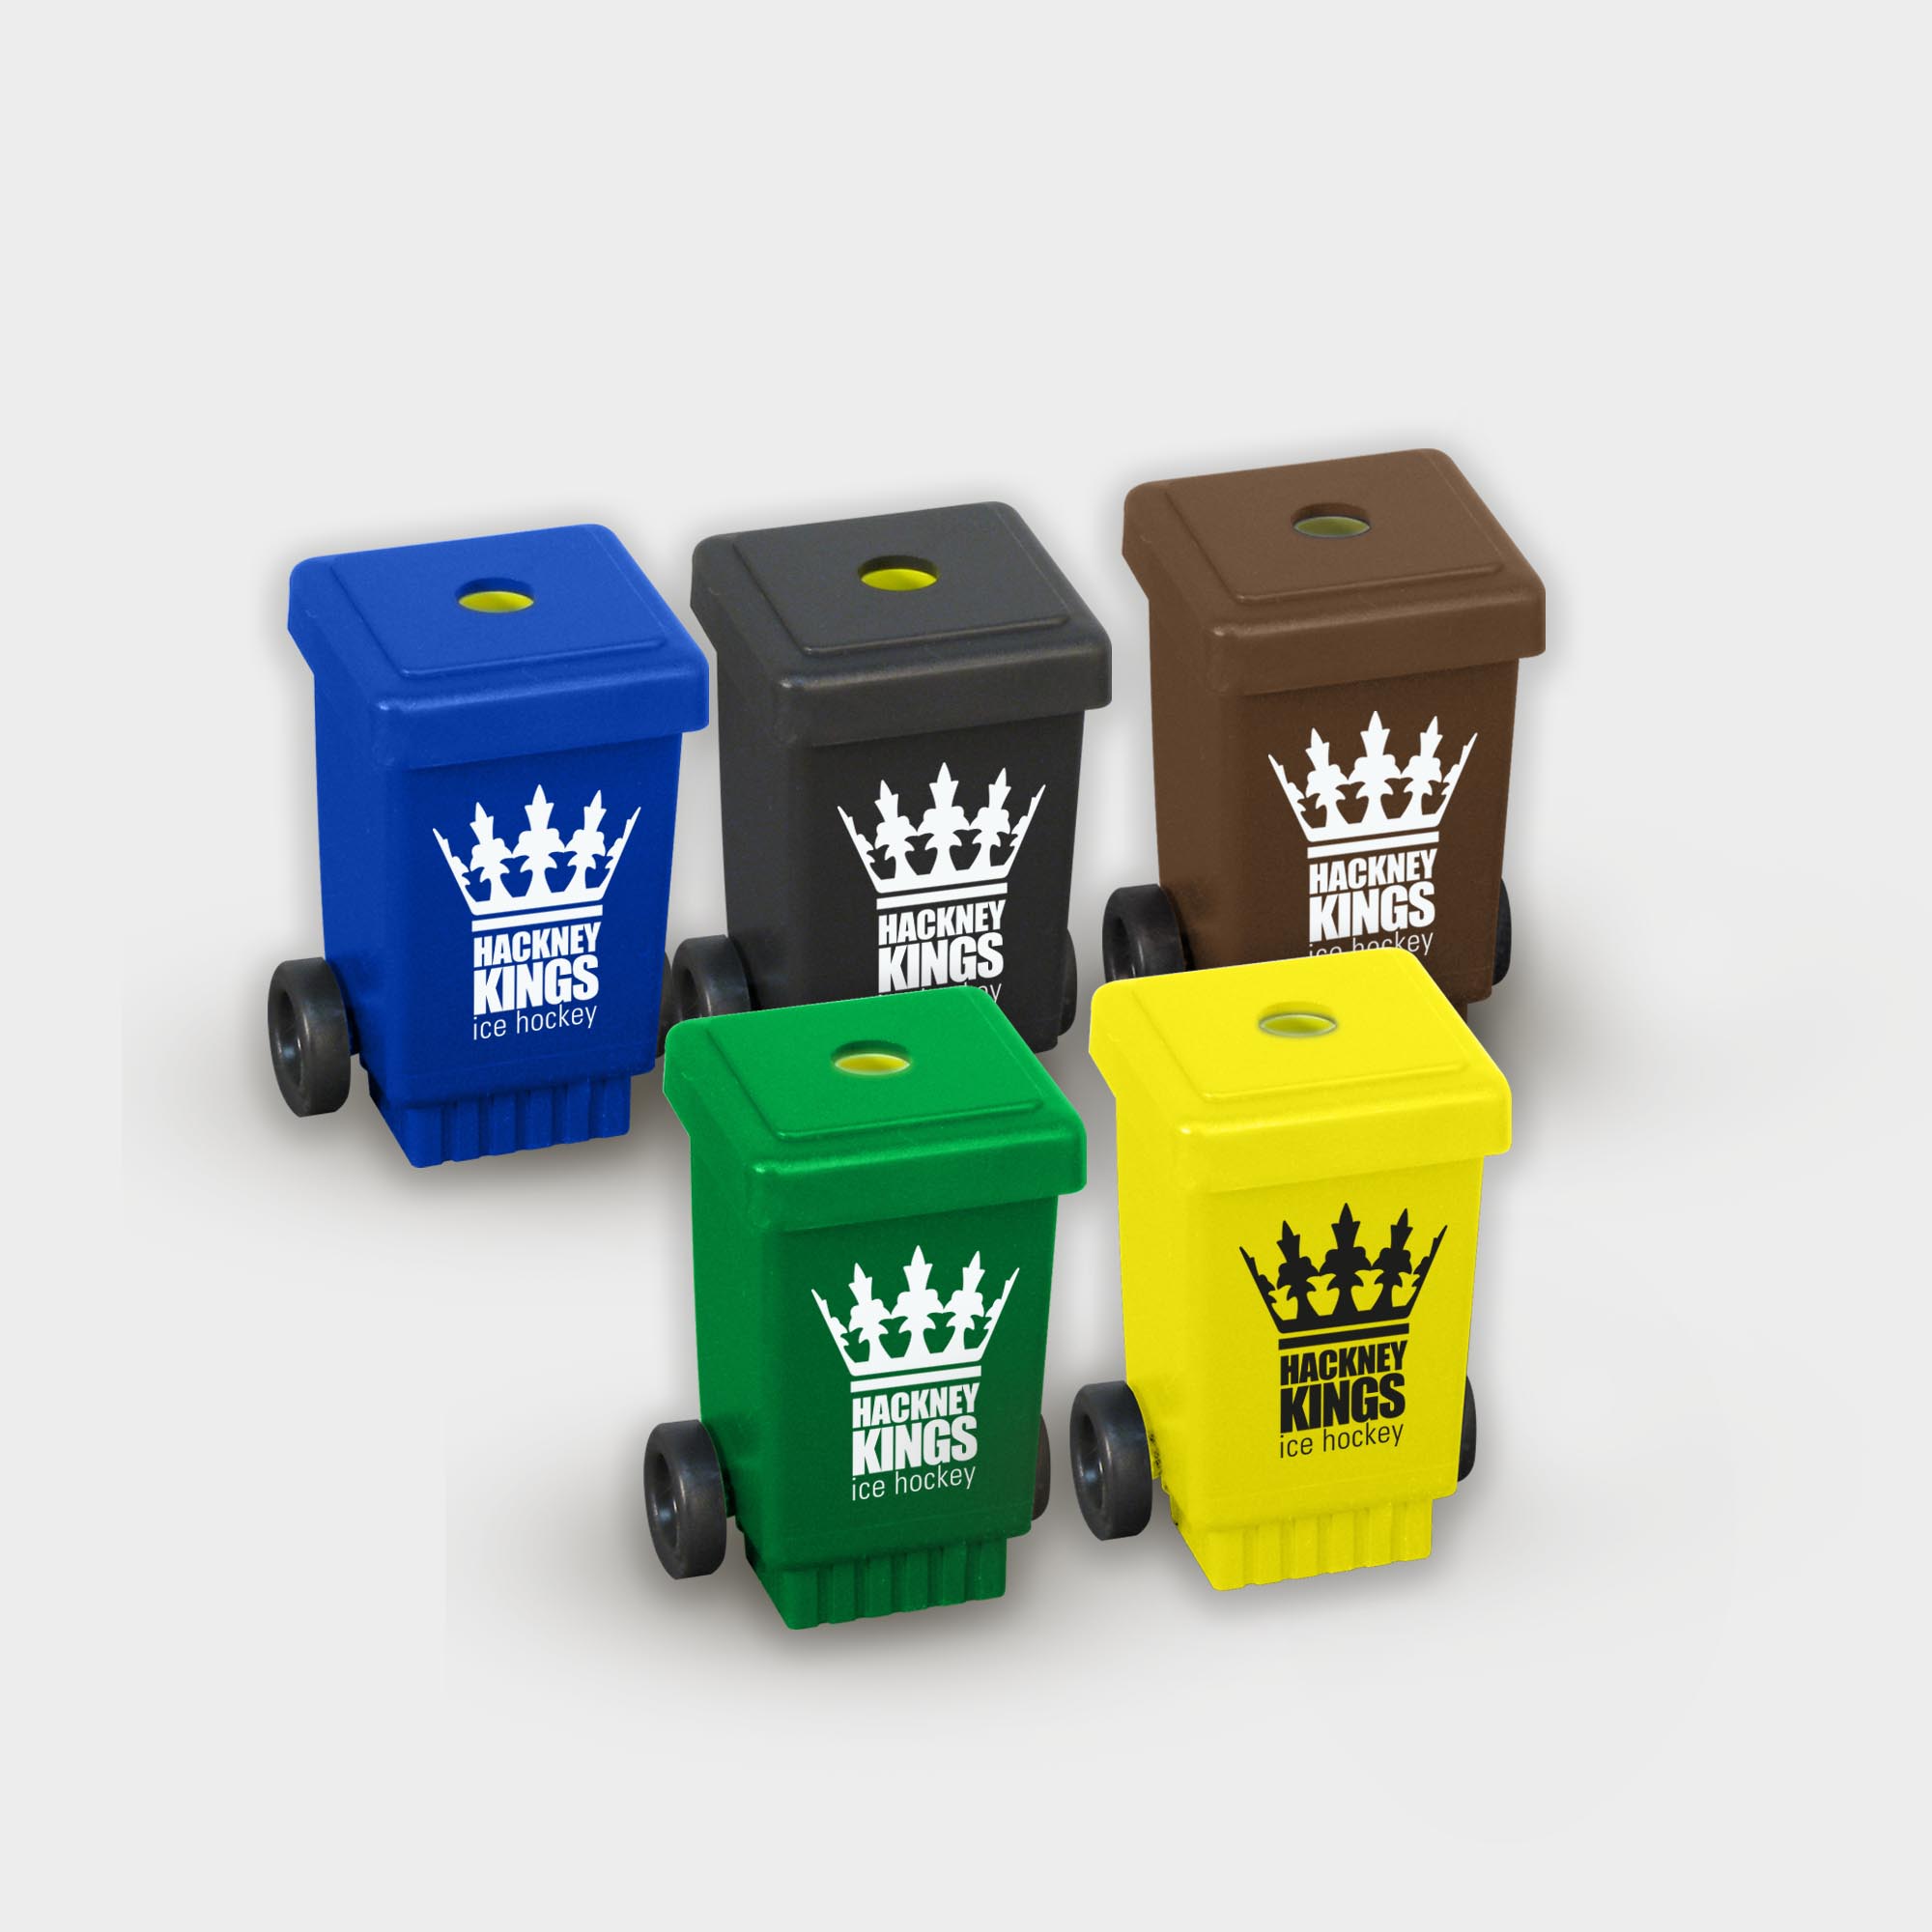 The Green & Good Wheelie Bin Pencil Sharpener made from recycled plastic (polystyrene). Made in the EU and available in a variety of colours.Features include a removable lid and small black wheels. Ideal for councils and waste management companies.